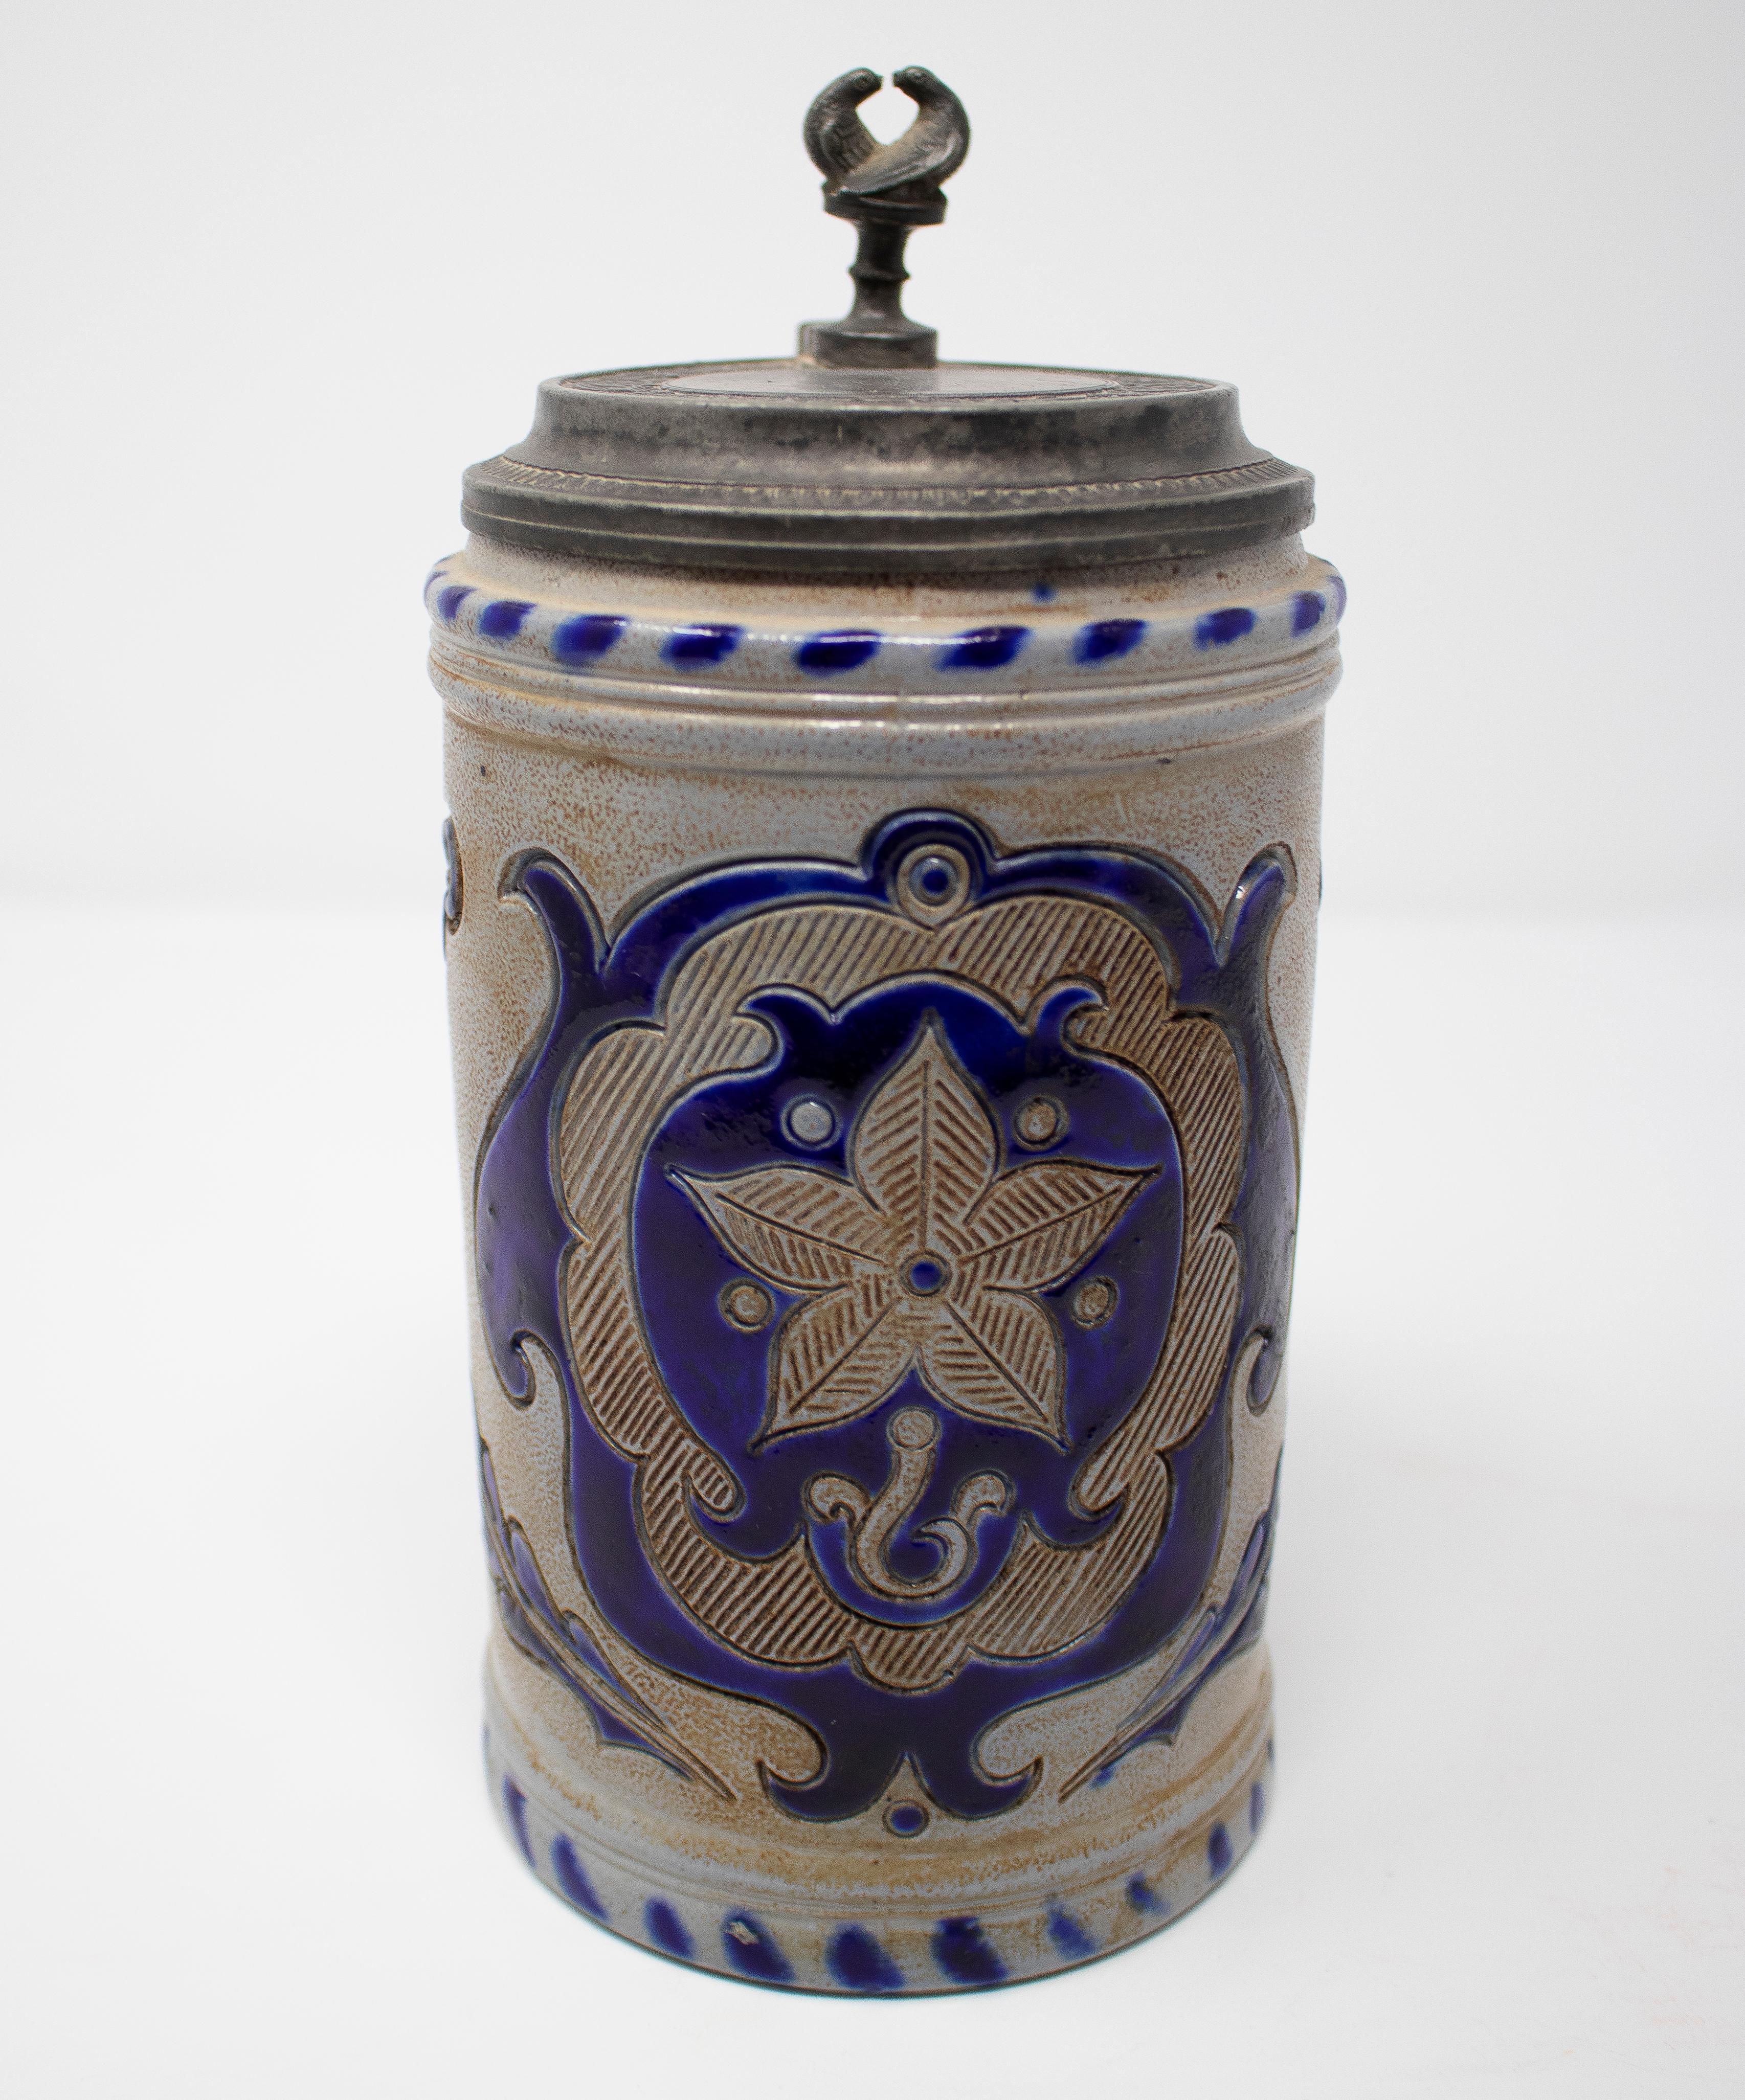 19th Century German Earthenware Beer Stein with Tin Lid and Cobalt Blue For Sale 4